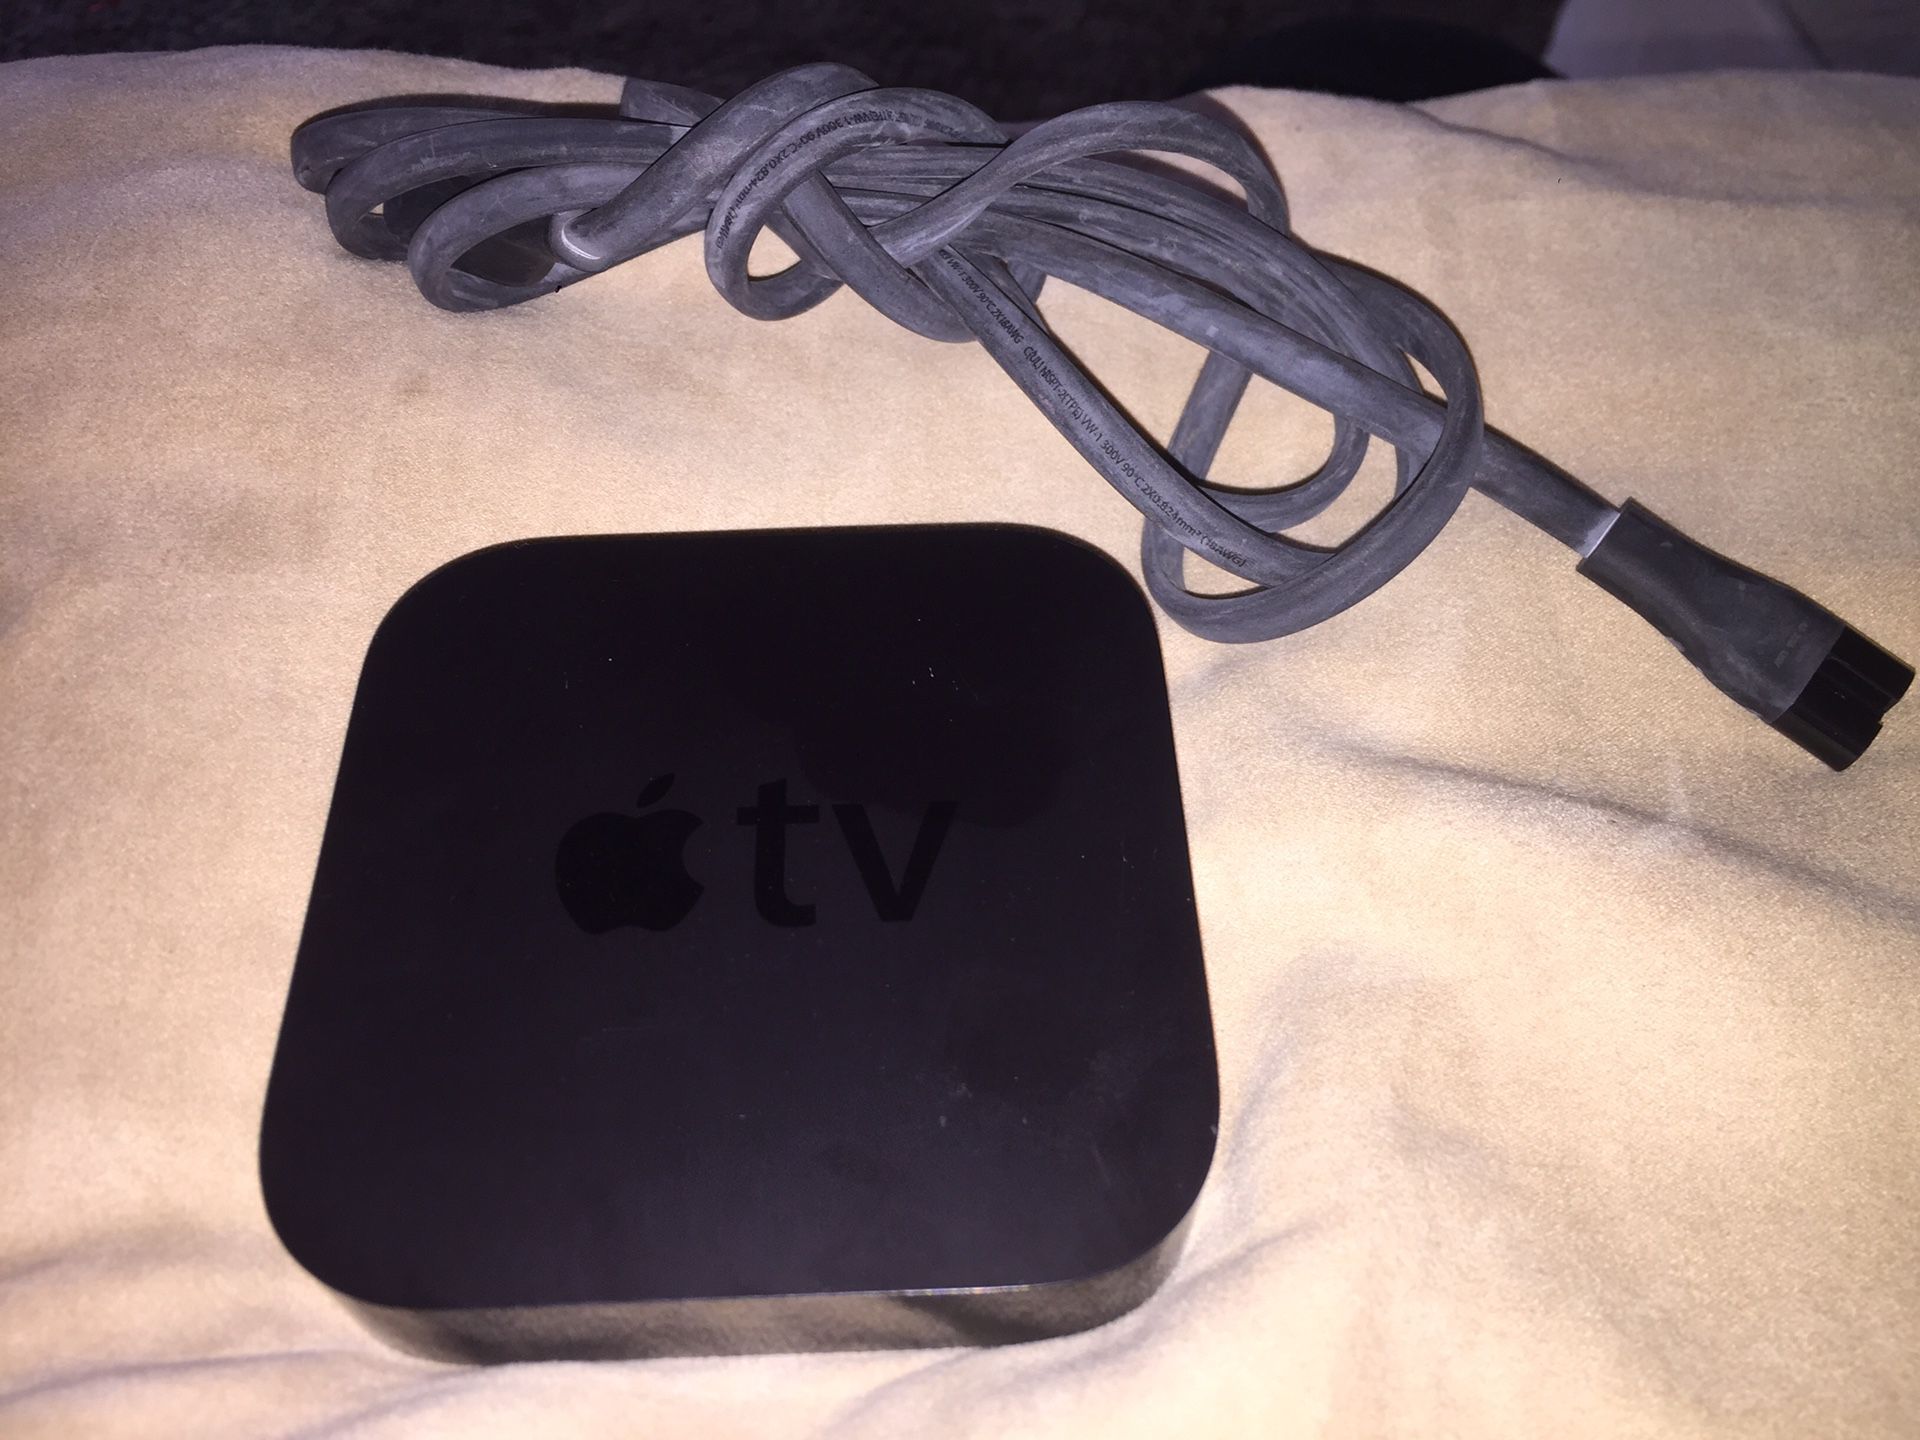 Apple TV A1427 is 3rd generation (missing control)